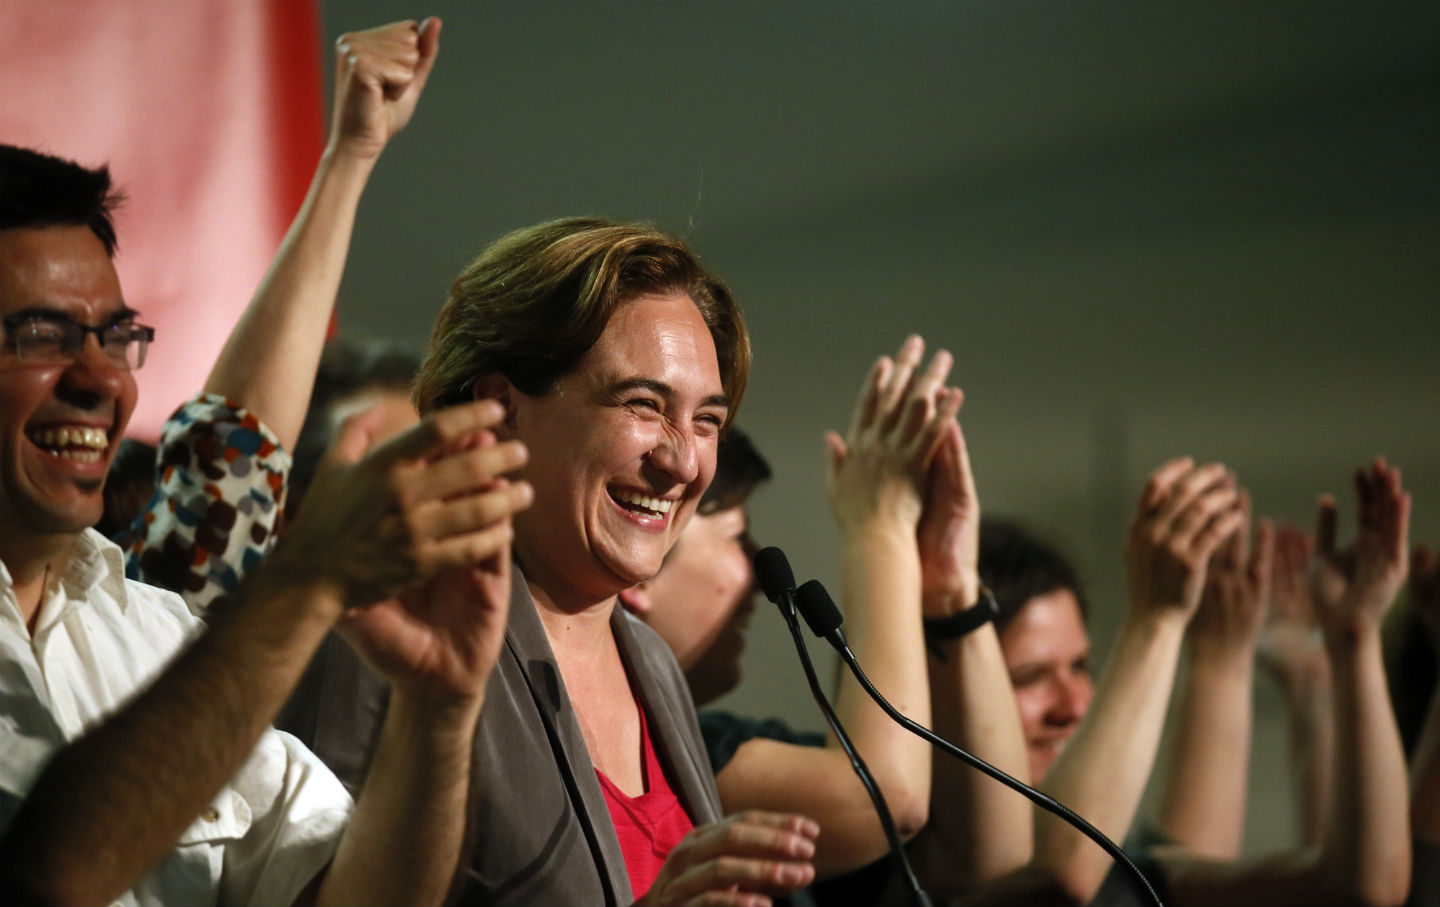 In Spain’s Seismic Elections, ‘It’s the Victory of David Over Goliath’